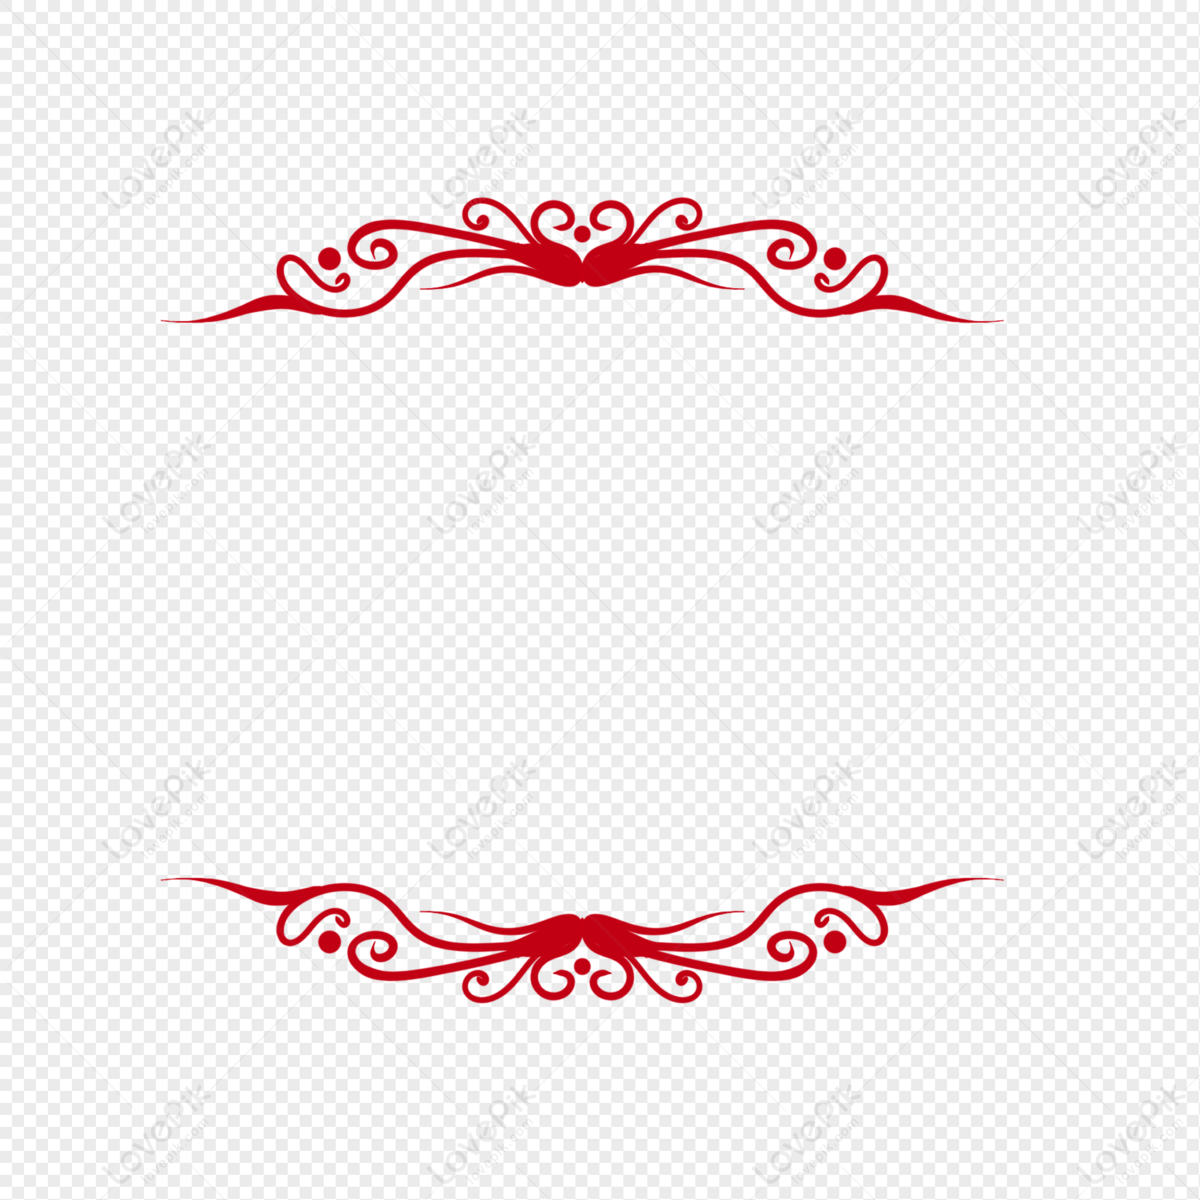 Red Pattern Decoration PNG Transparent Image And Clipart Image For ...